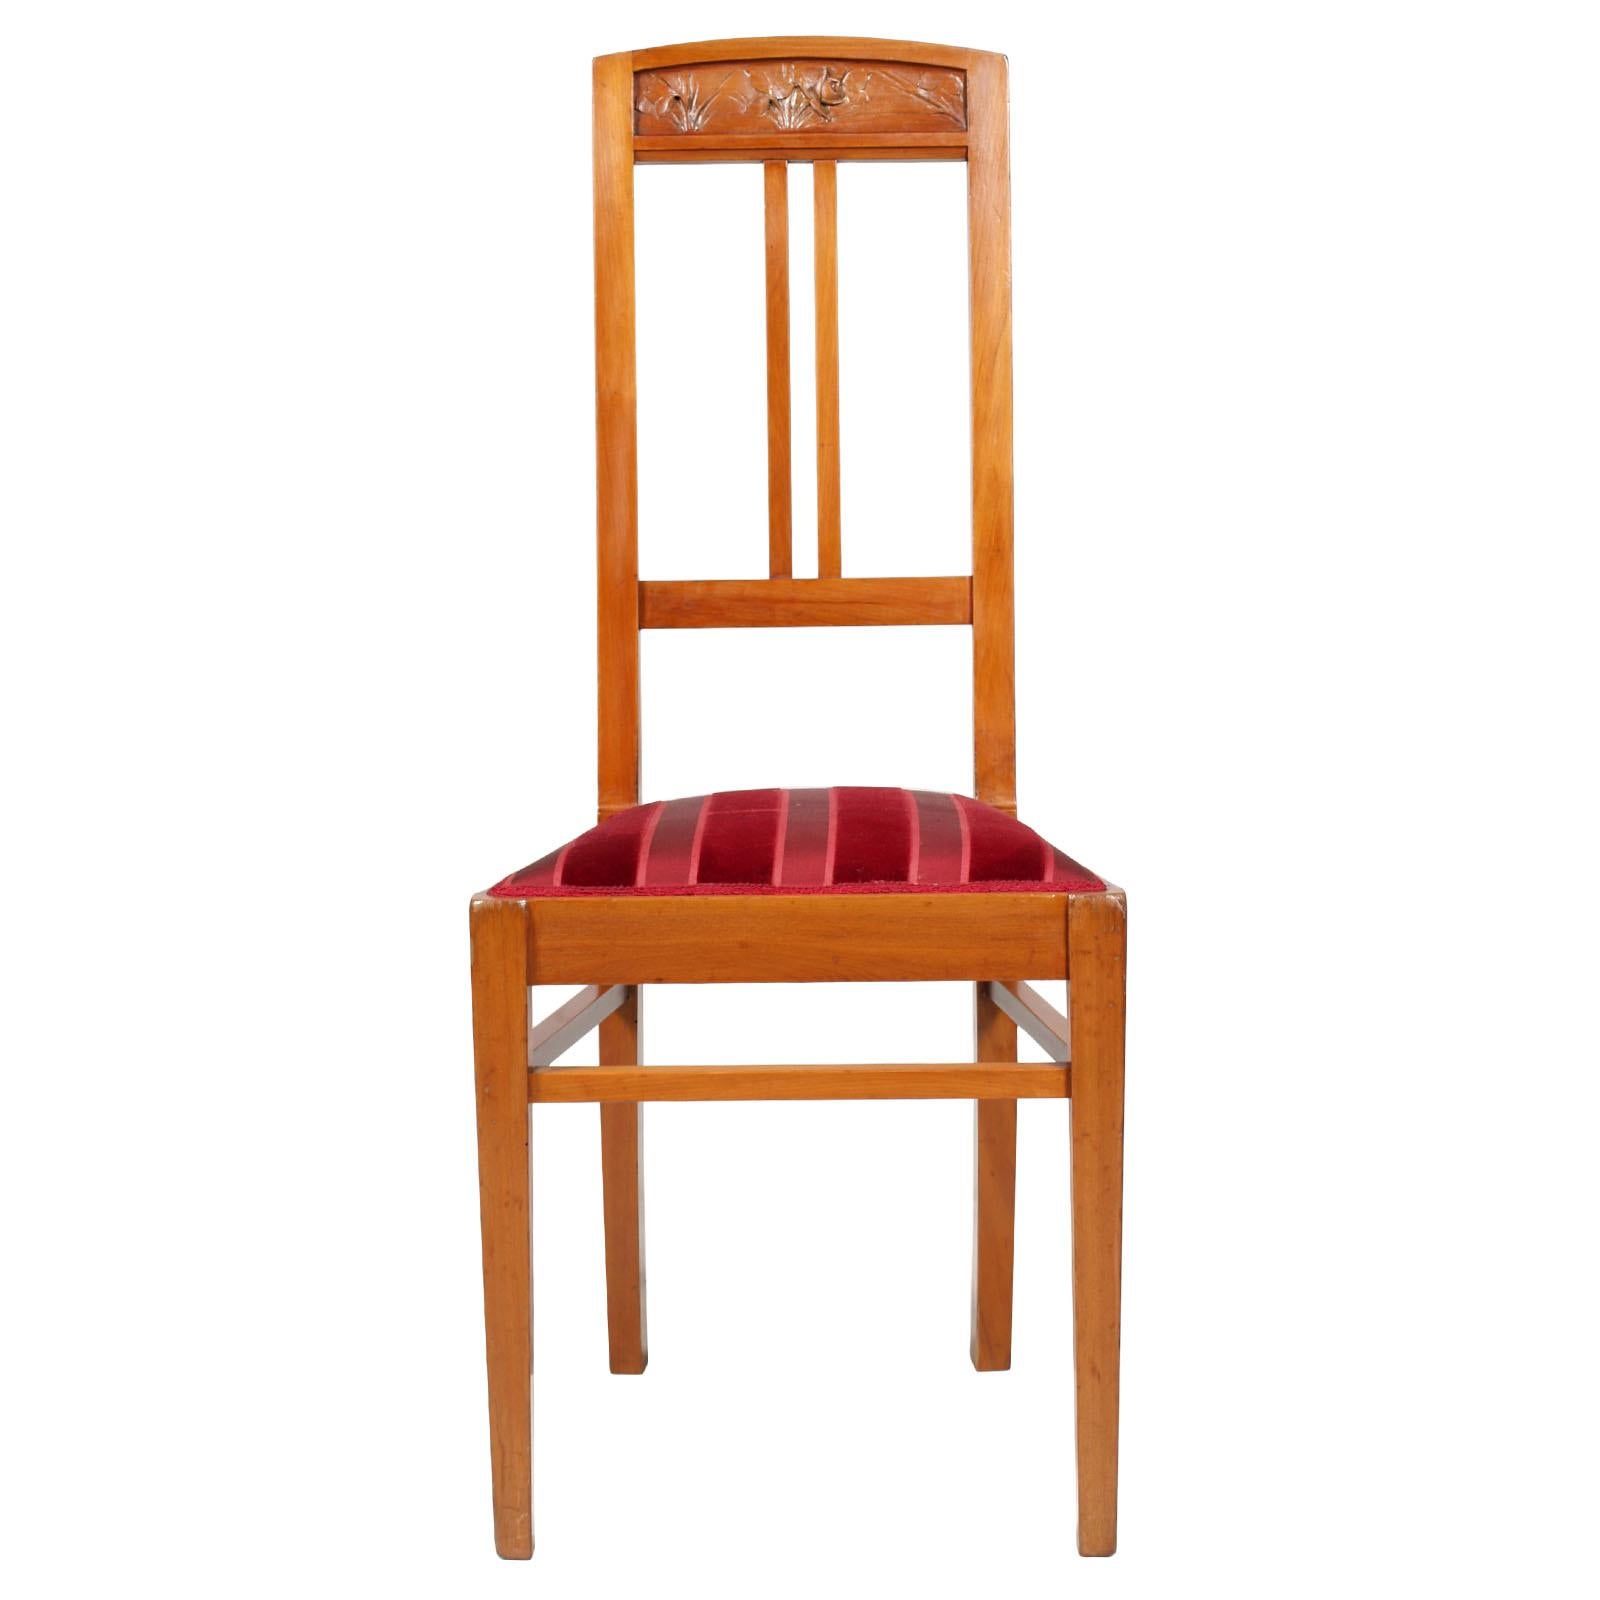 Elegant Italian Art Nouveau side chairs with stool, in blond walnut, hand carved, restored and polished with wax. Precious two-colored striped fabric in dark red velvet.

Measures cm: chairs H 47/105, W 42, D 45 - Stool in cm: H 40/67, W 53, D 32.